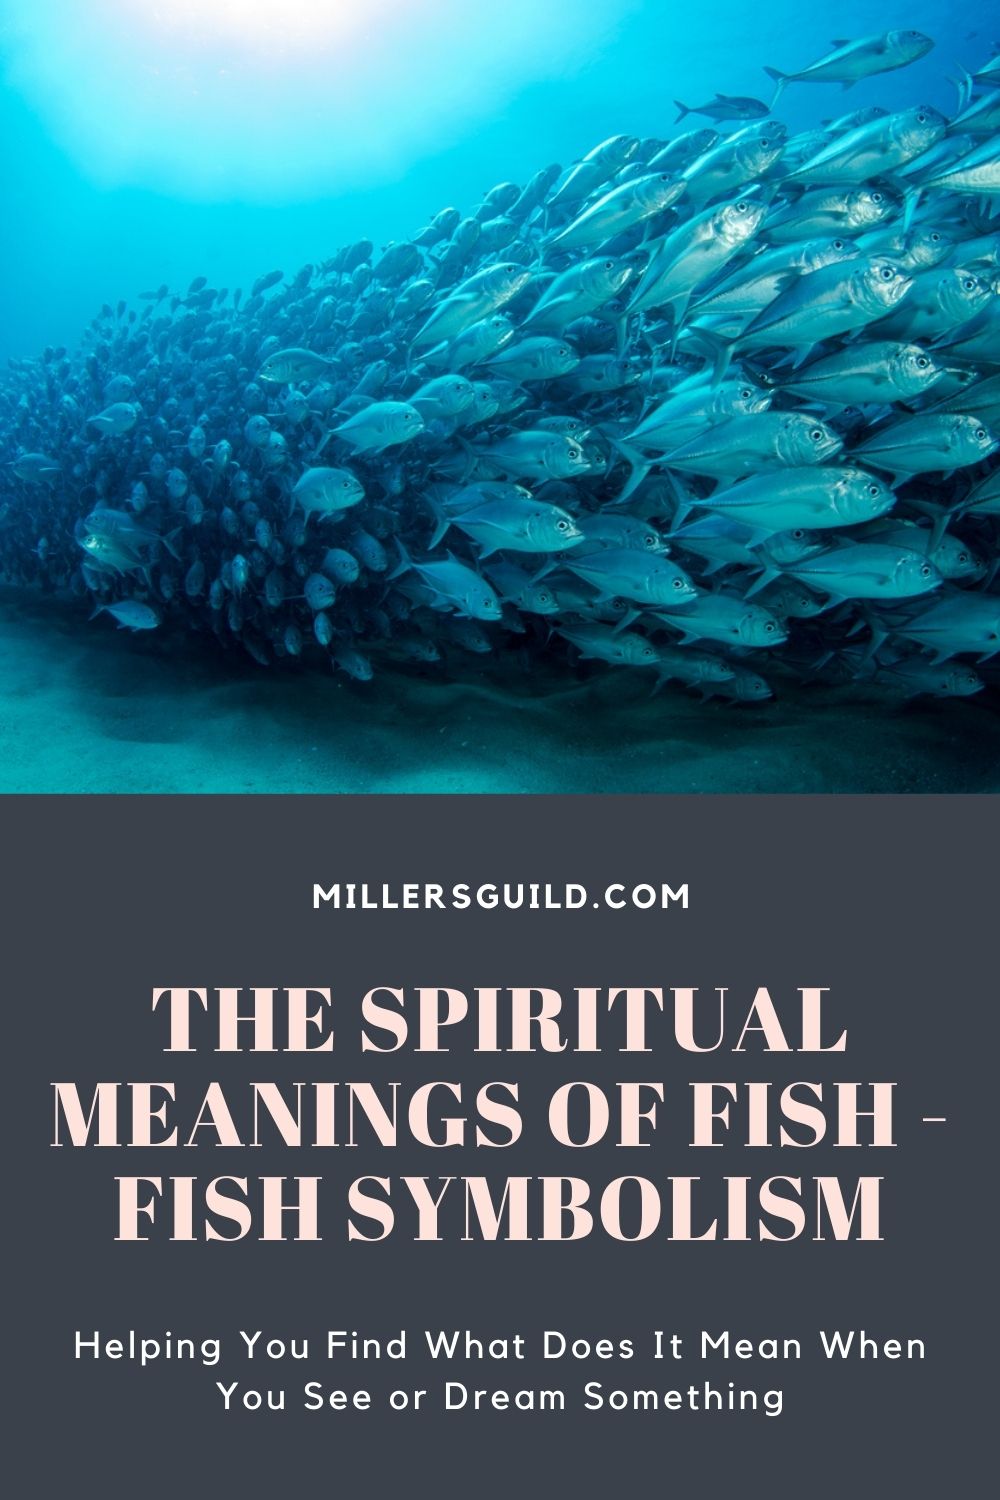 The Spiritual Meanings of Fish - Fish Symbolism 1